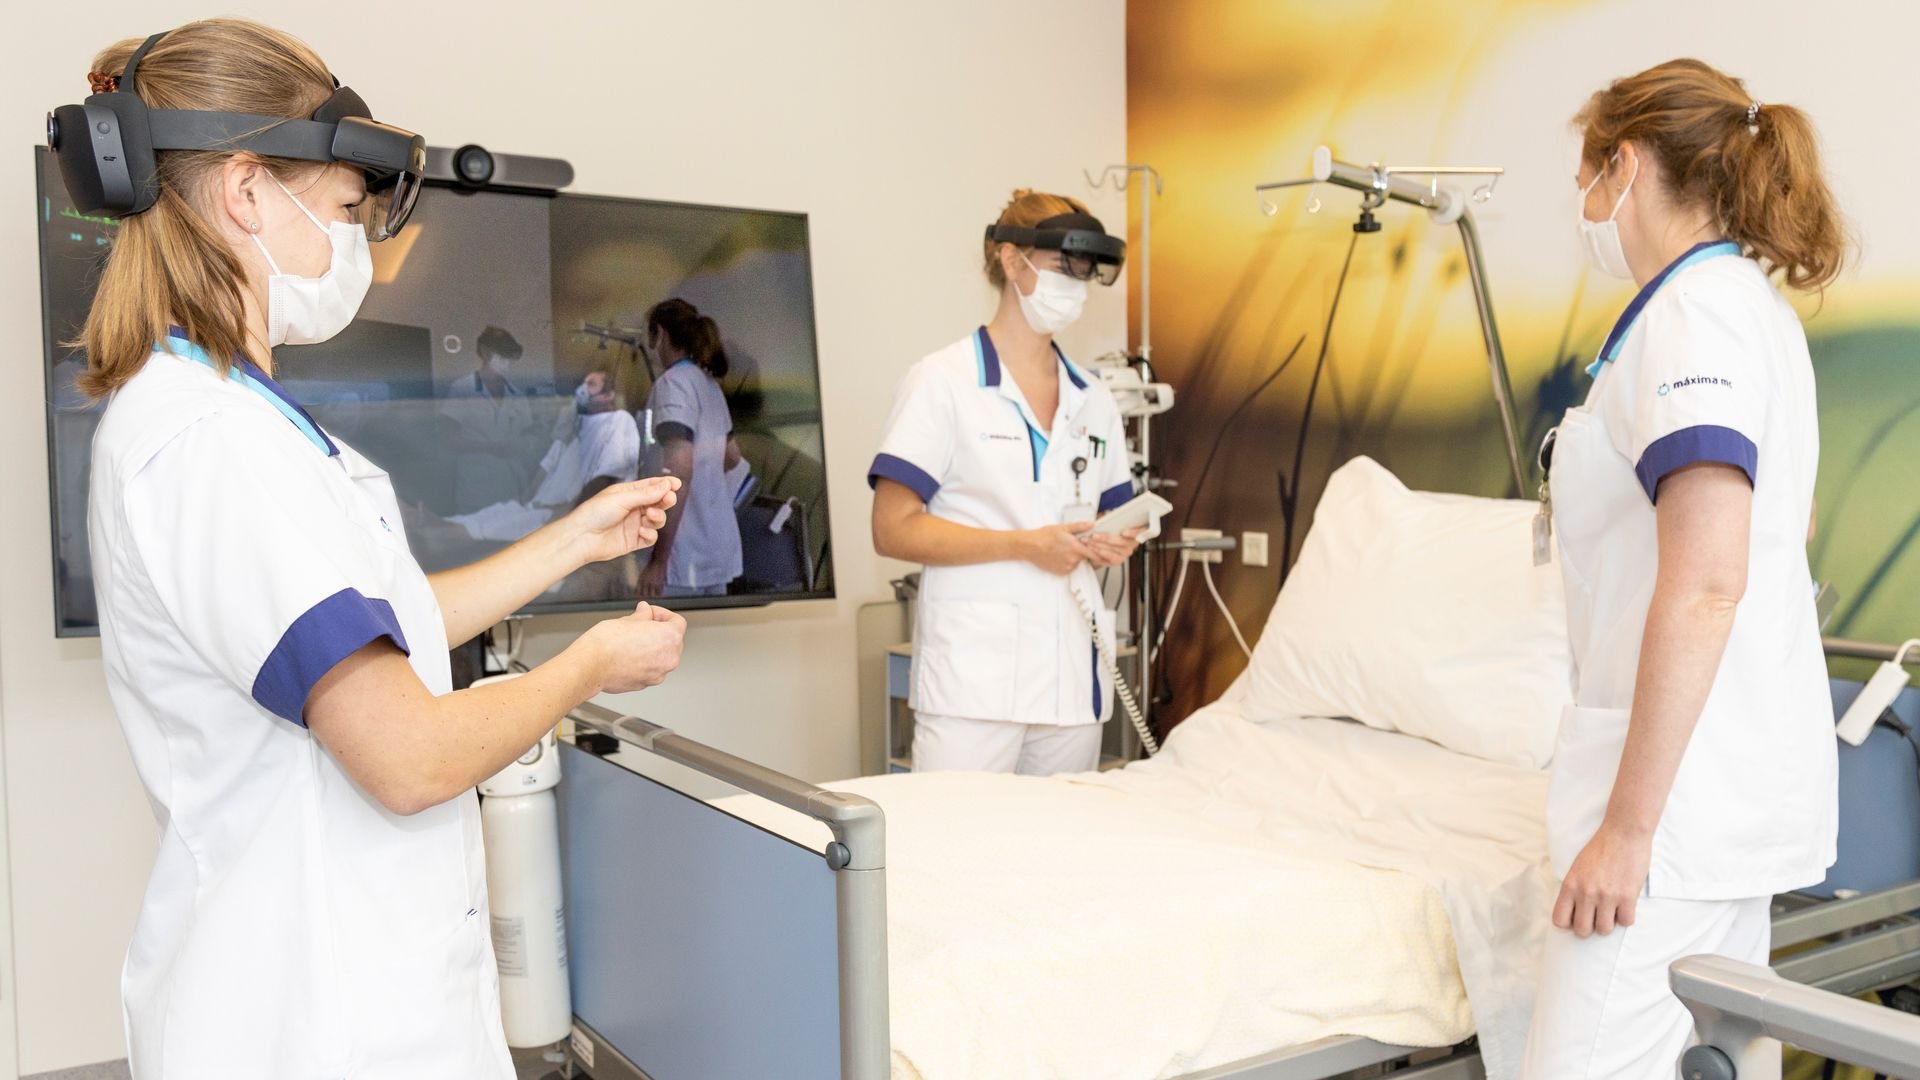 ASML has supported MMC Veldhoven, a neighboring hospital to it’s campus in the Netherlands, to implement augmented reality trainings